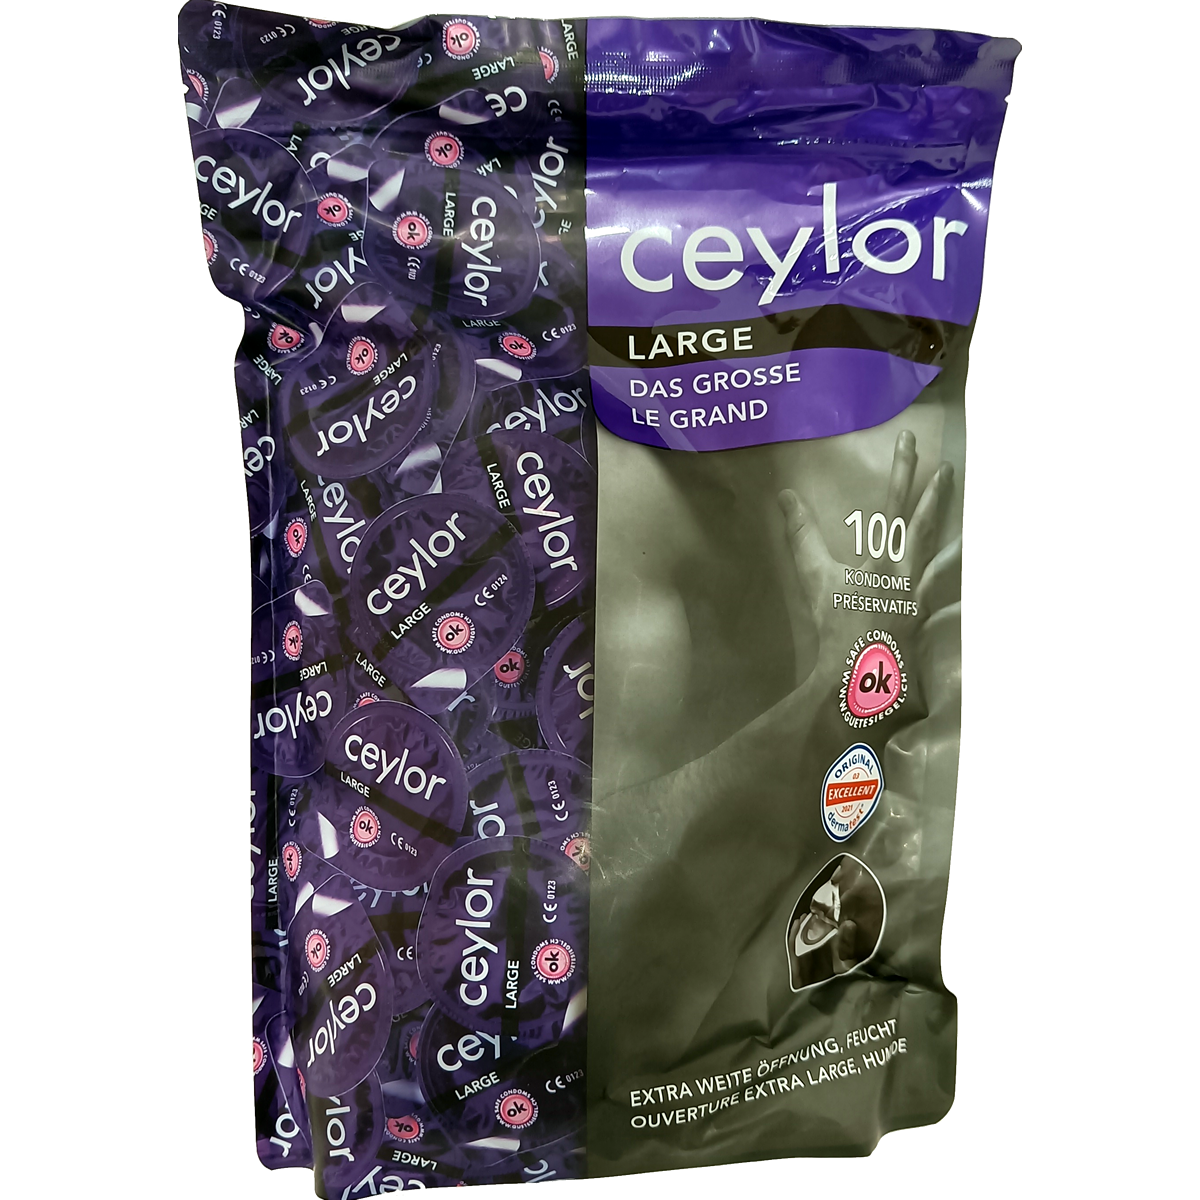 Ceylor «Large» 100 extra wide condoms with cream lubricant, hygienically sealed in condom pods